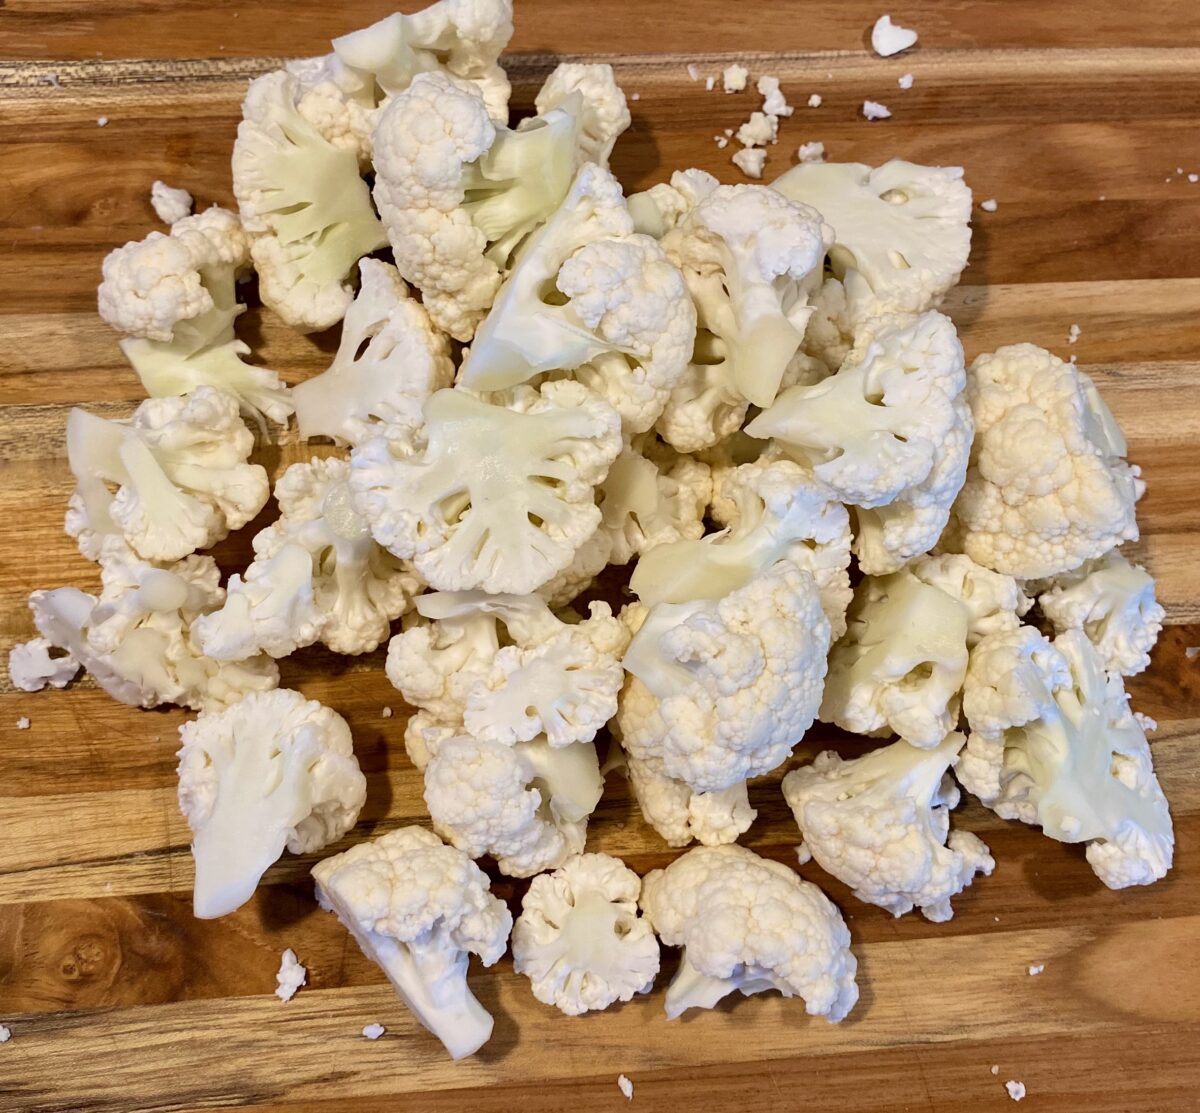 Large pile of trimmed cauliflower pieces on a cutting board ready to be microwaved.